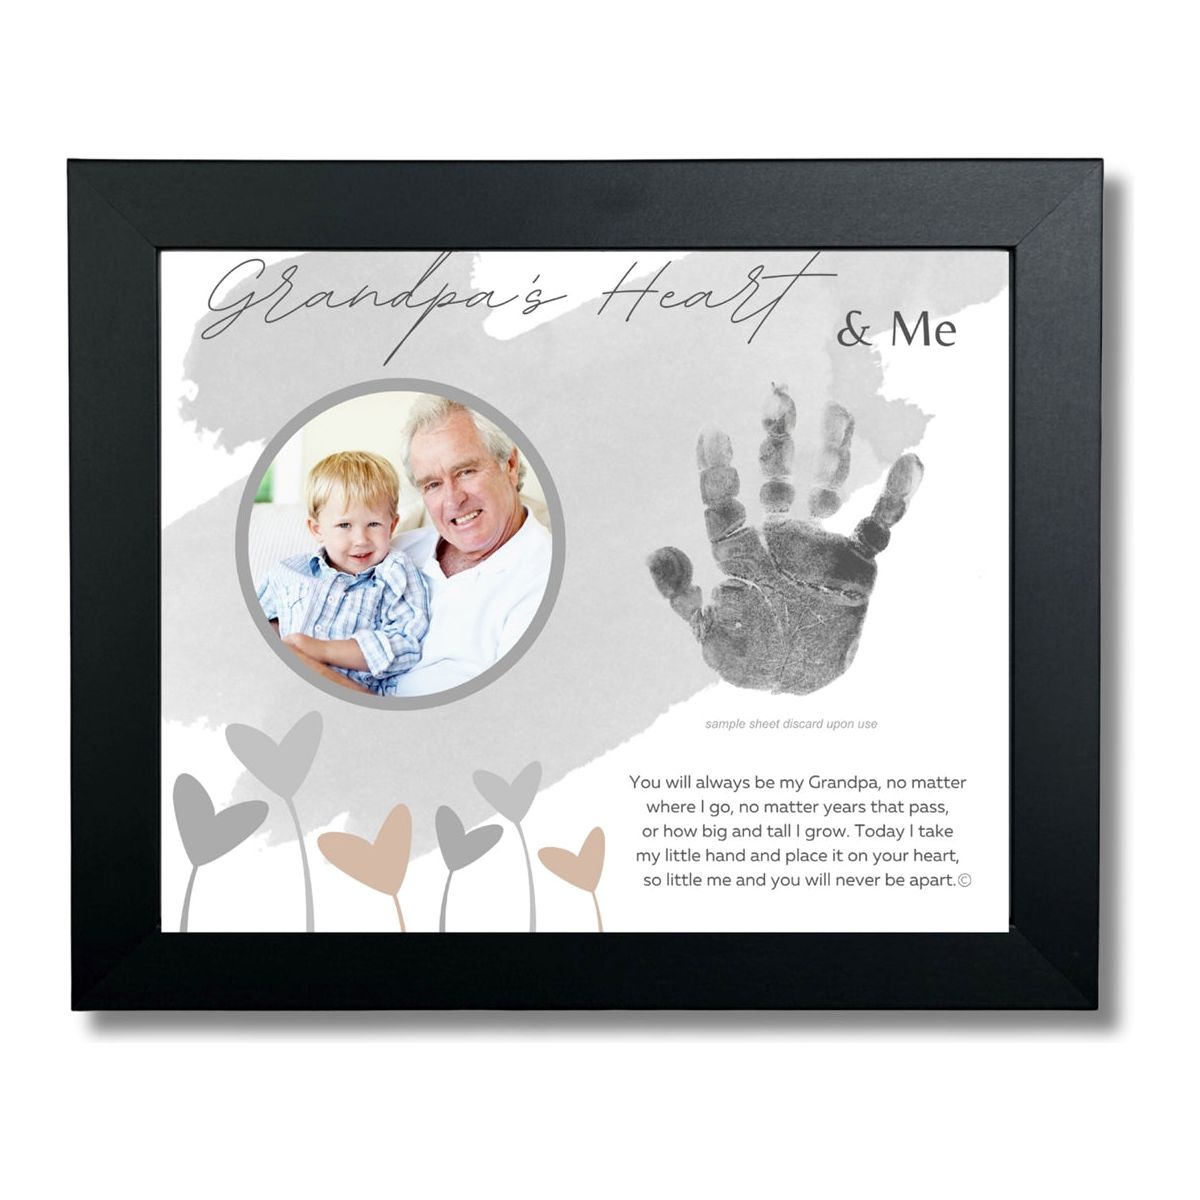 8x10 black frame with "Grandpa's Heart & Me" artwork with poem, space for a handprint, and a circular opening for a photograph.